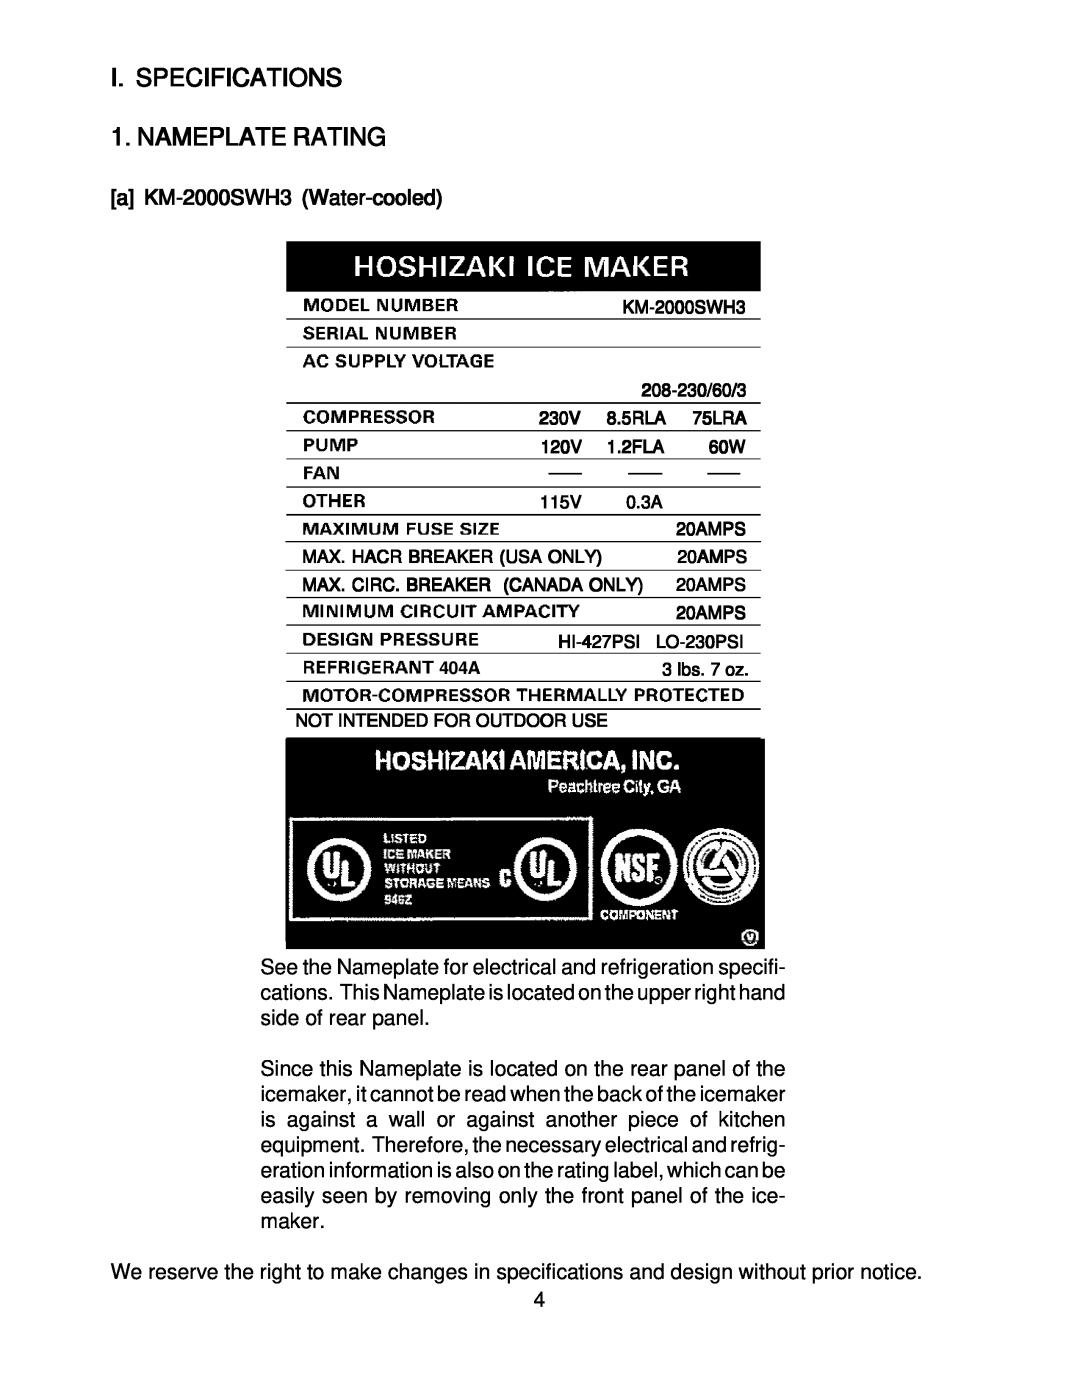 Hoshizaki KM-2000SRH3 instruction manual I. SPECIFICATIONS 1. NAMEPLATE RATING, a KM-2000SWH3 Water-cooled 